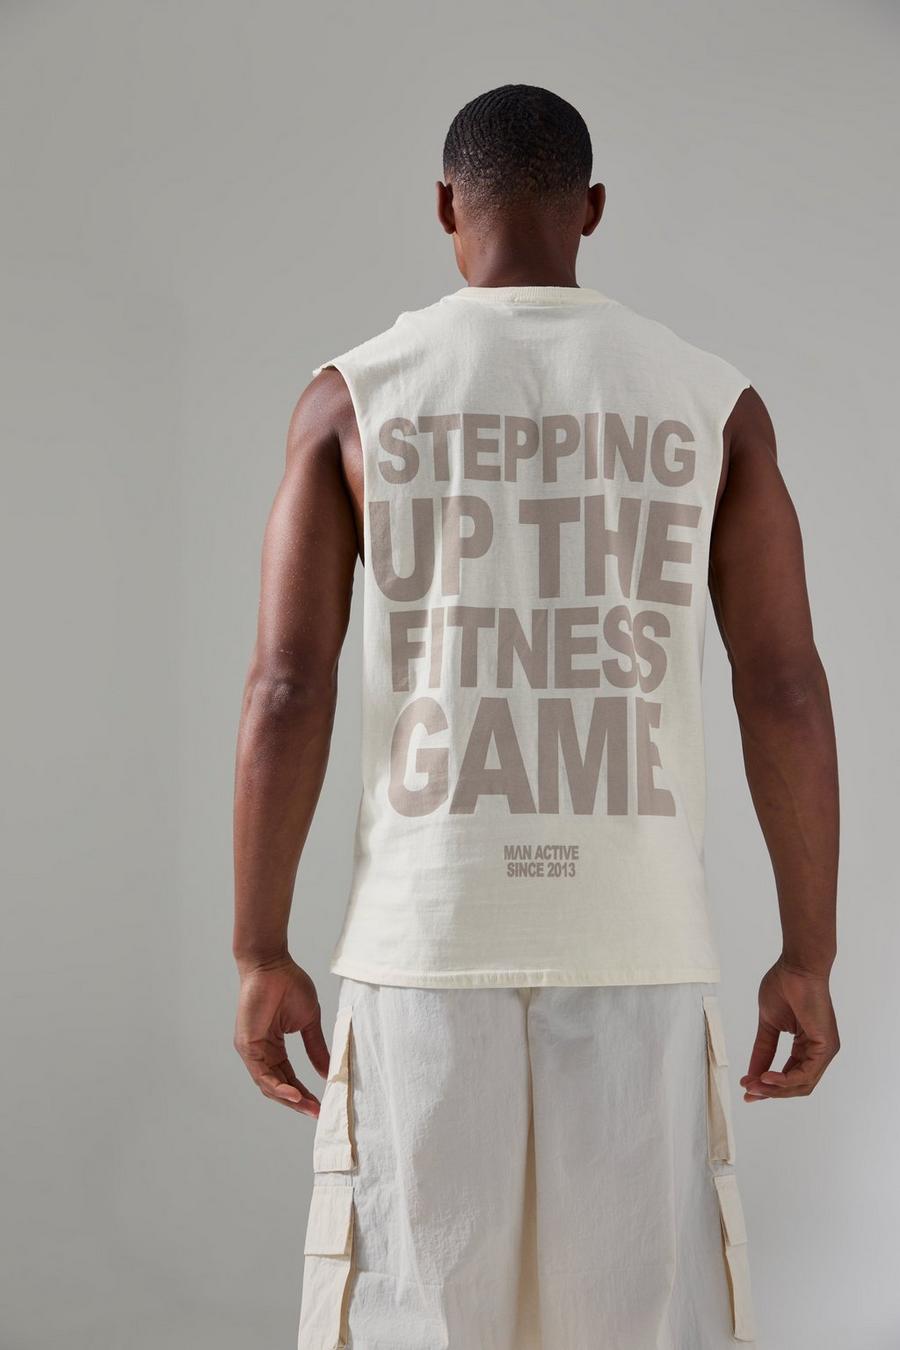 Ecru Man Active Stepping Up The Fitness Game Tank